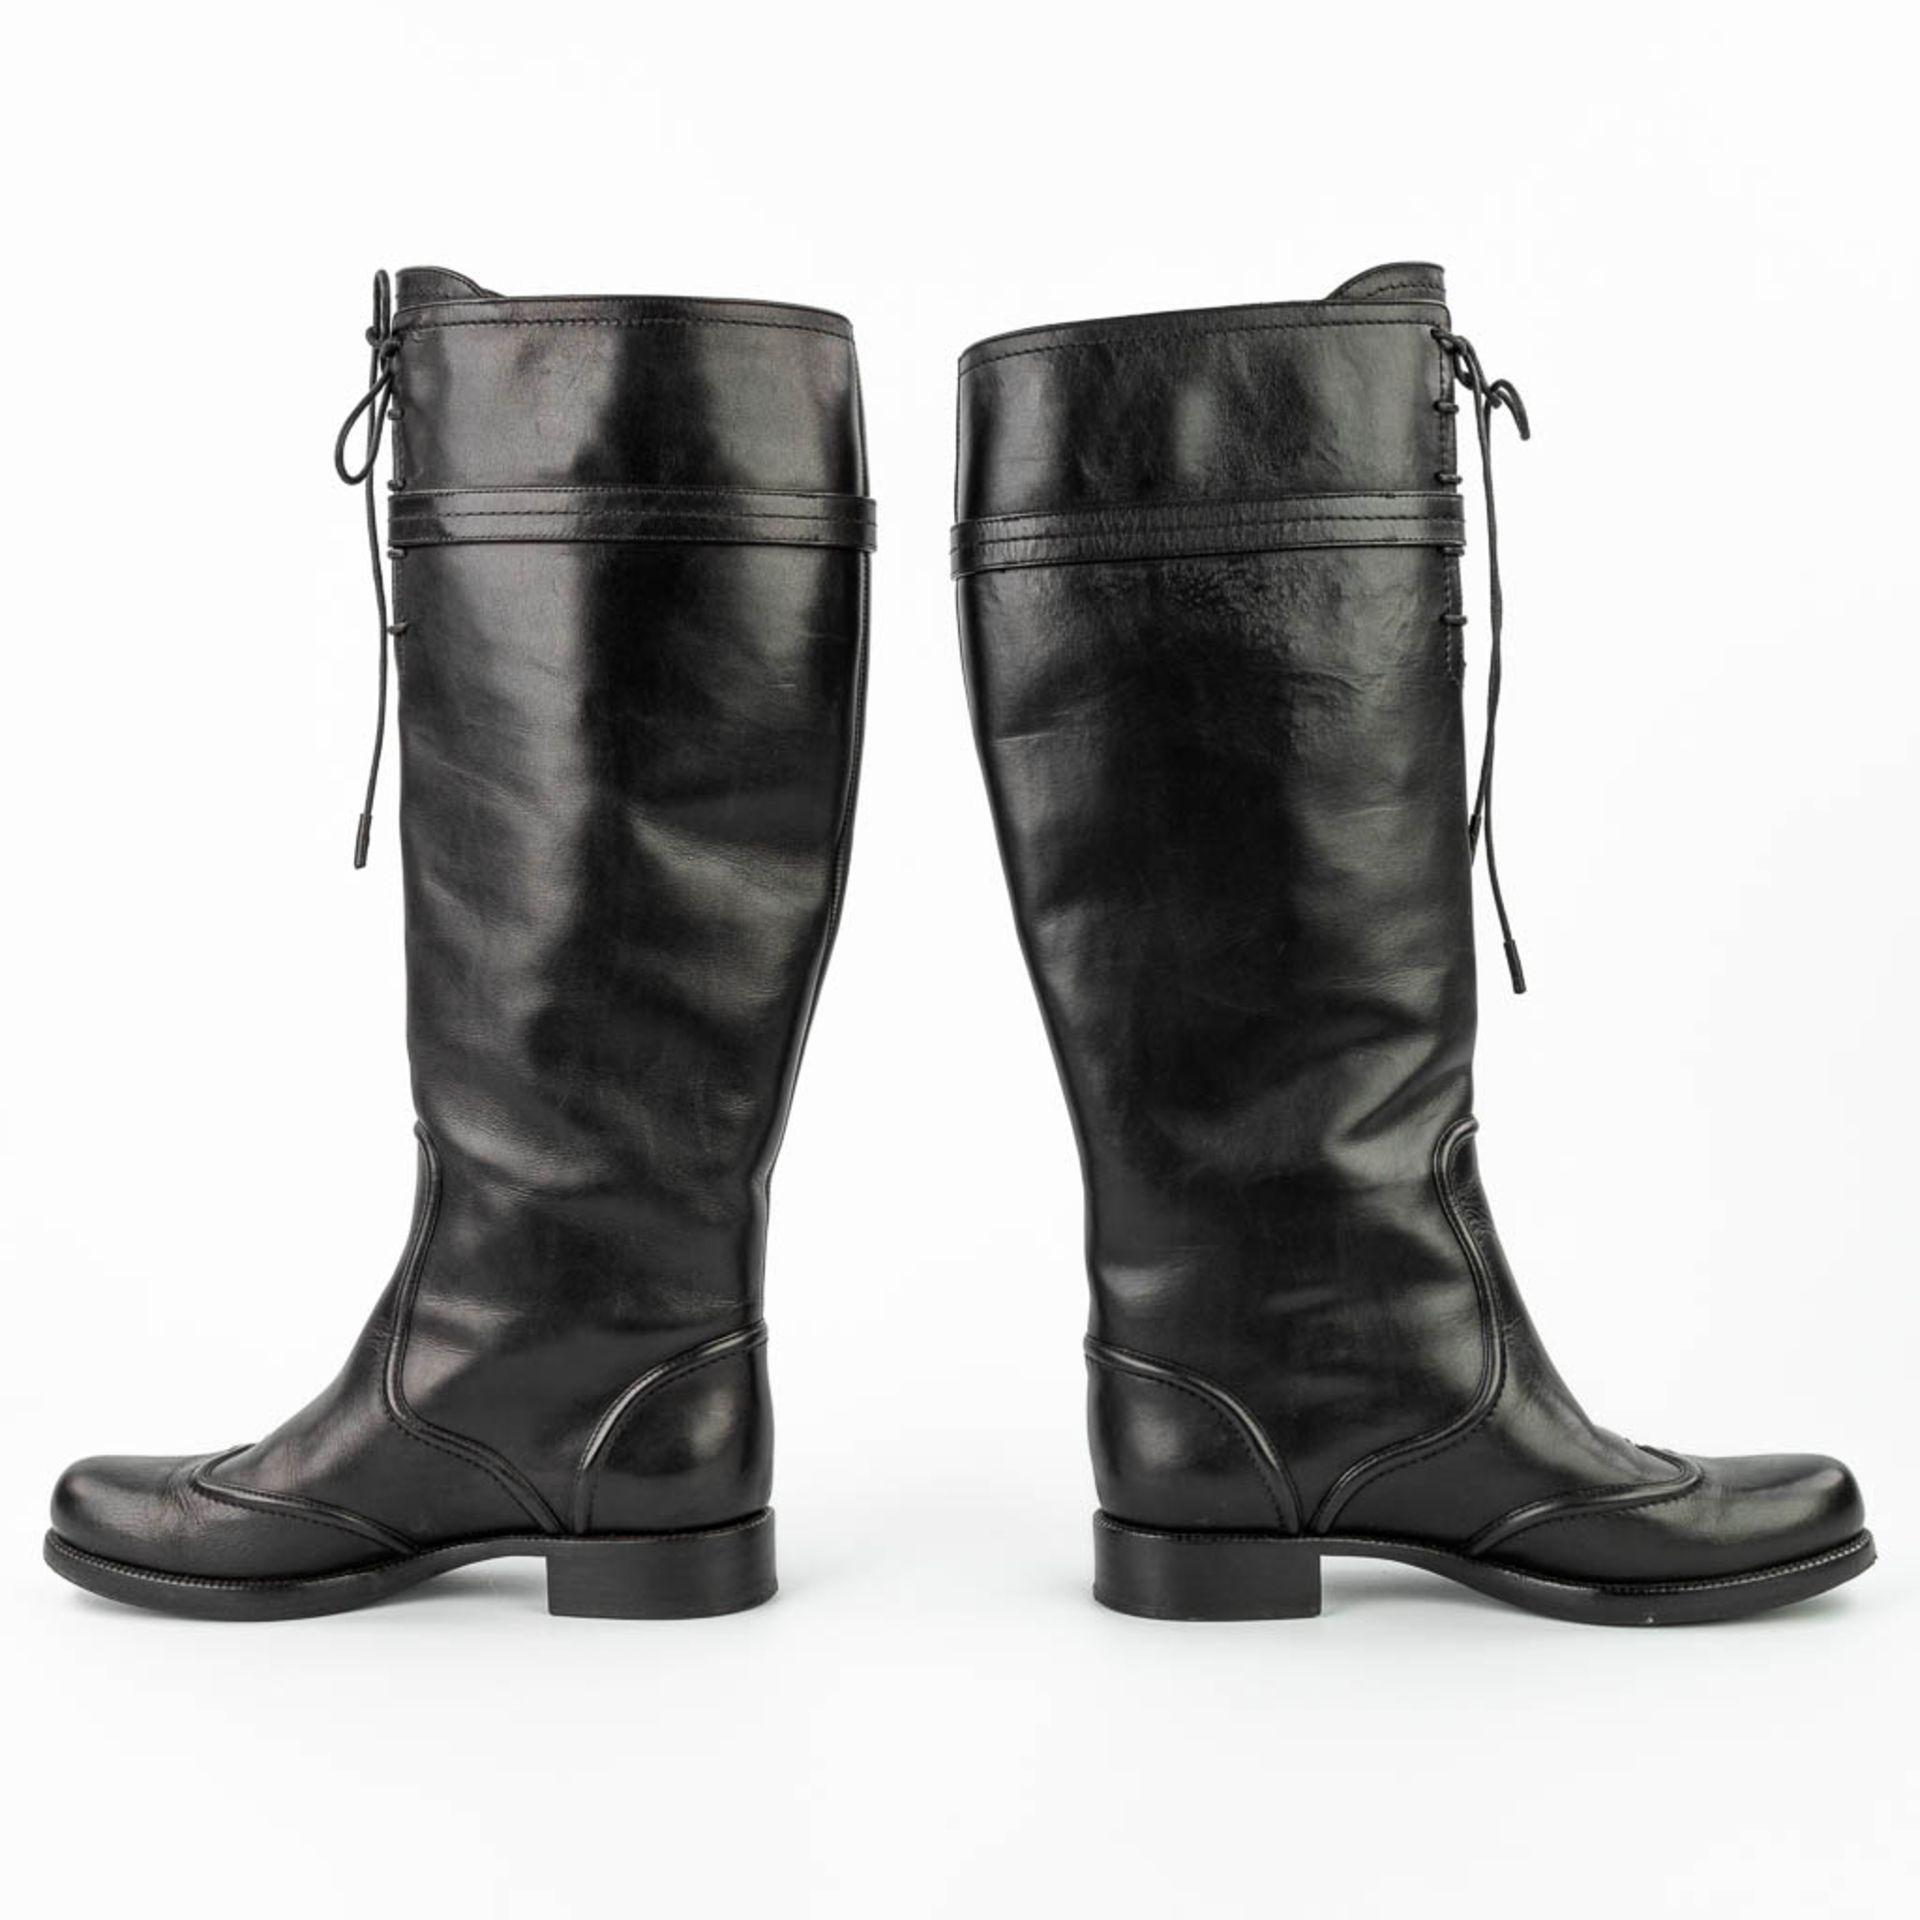 Louis Vuitton, a pair of leather boots. Made in Italy. EU size 37. (W: 24 x H: 42 cm) - Image 4 of 14